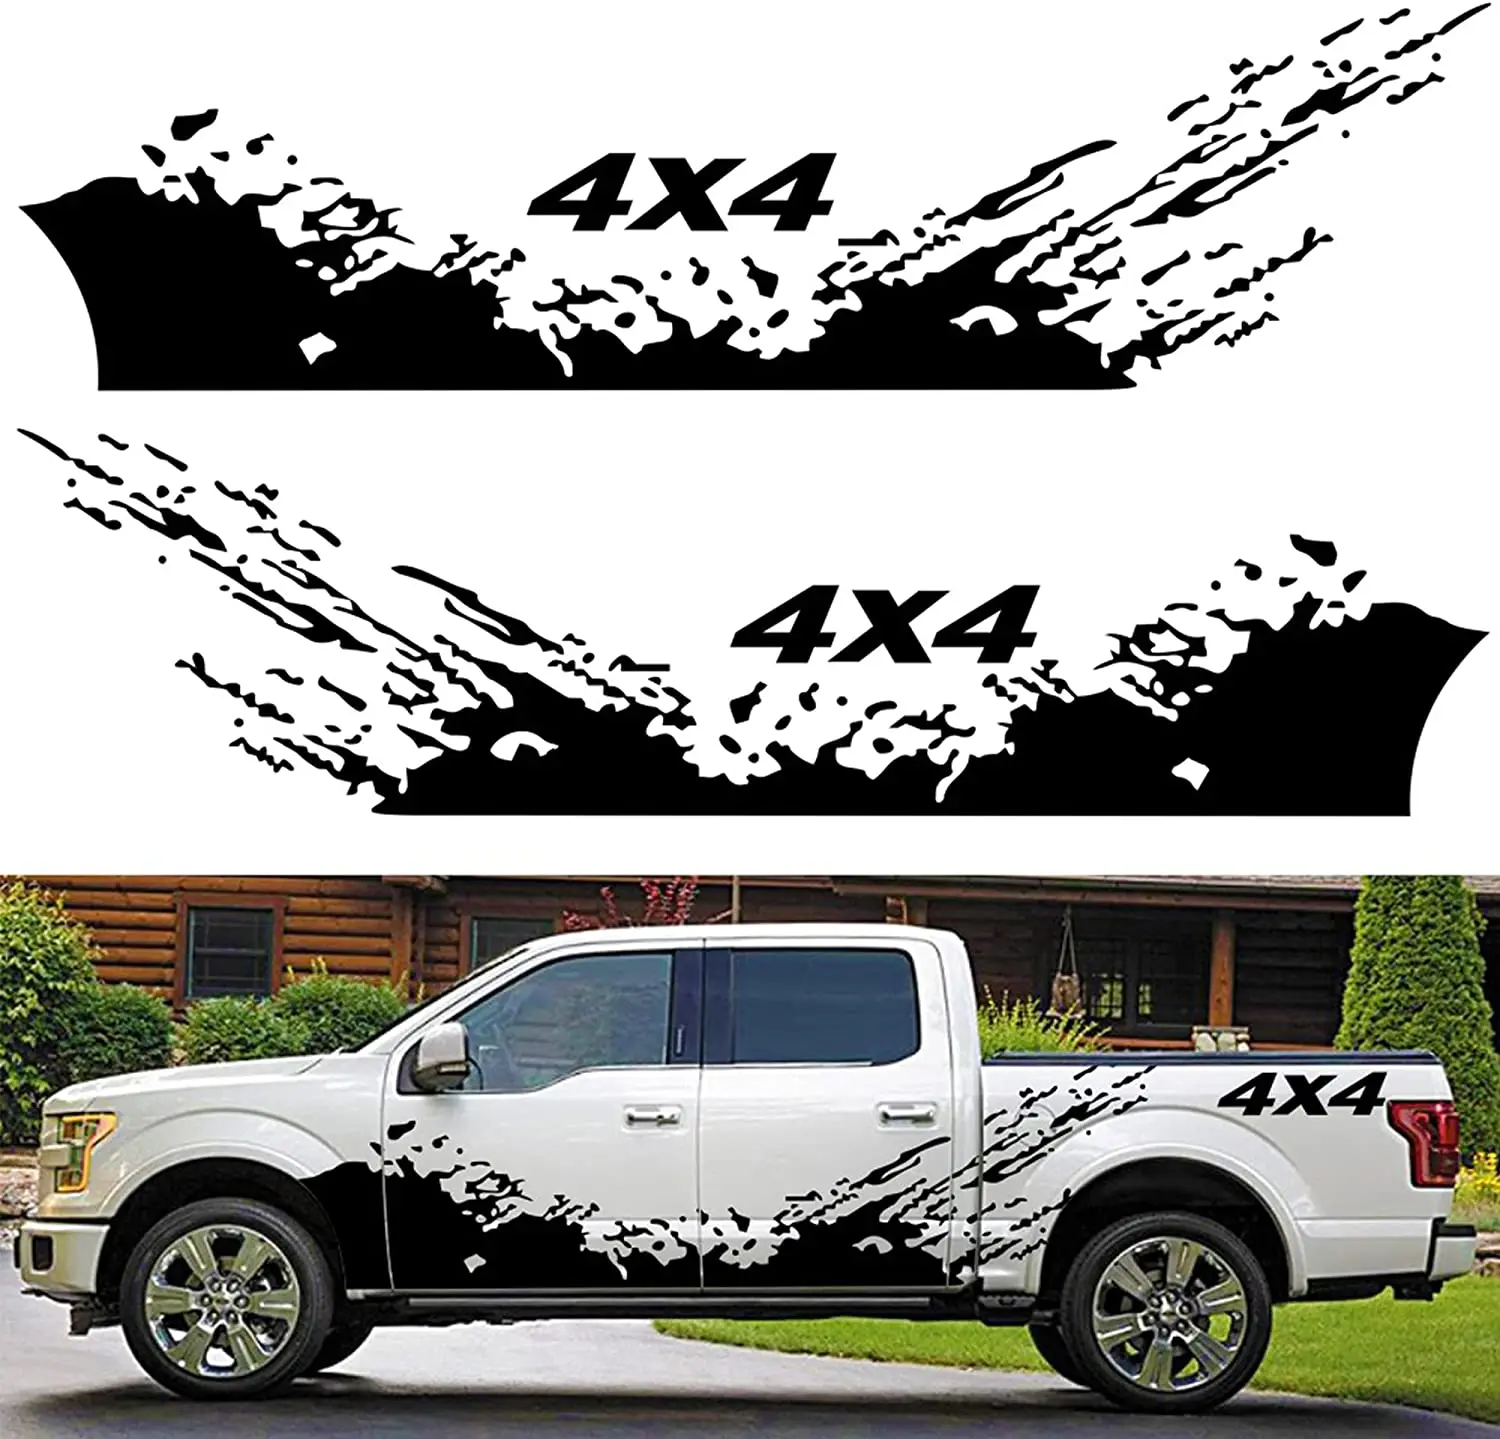 

Fochutech Truck Car Stickers Large Car Side Decals for Truck Pickup SUV Car Racing Stripes Car Stickers 4x4 Waves Graphics